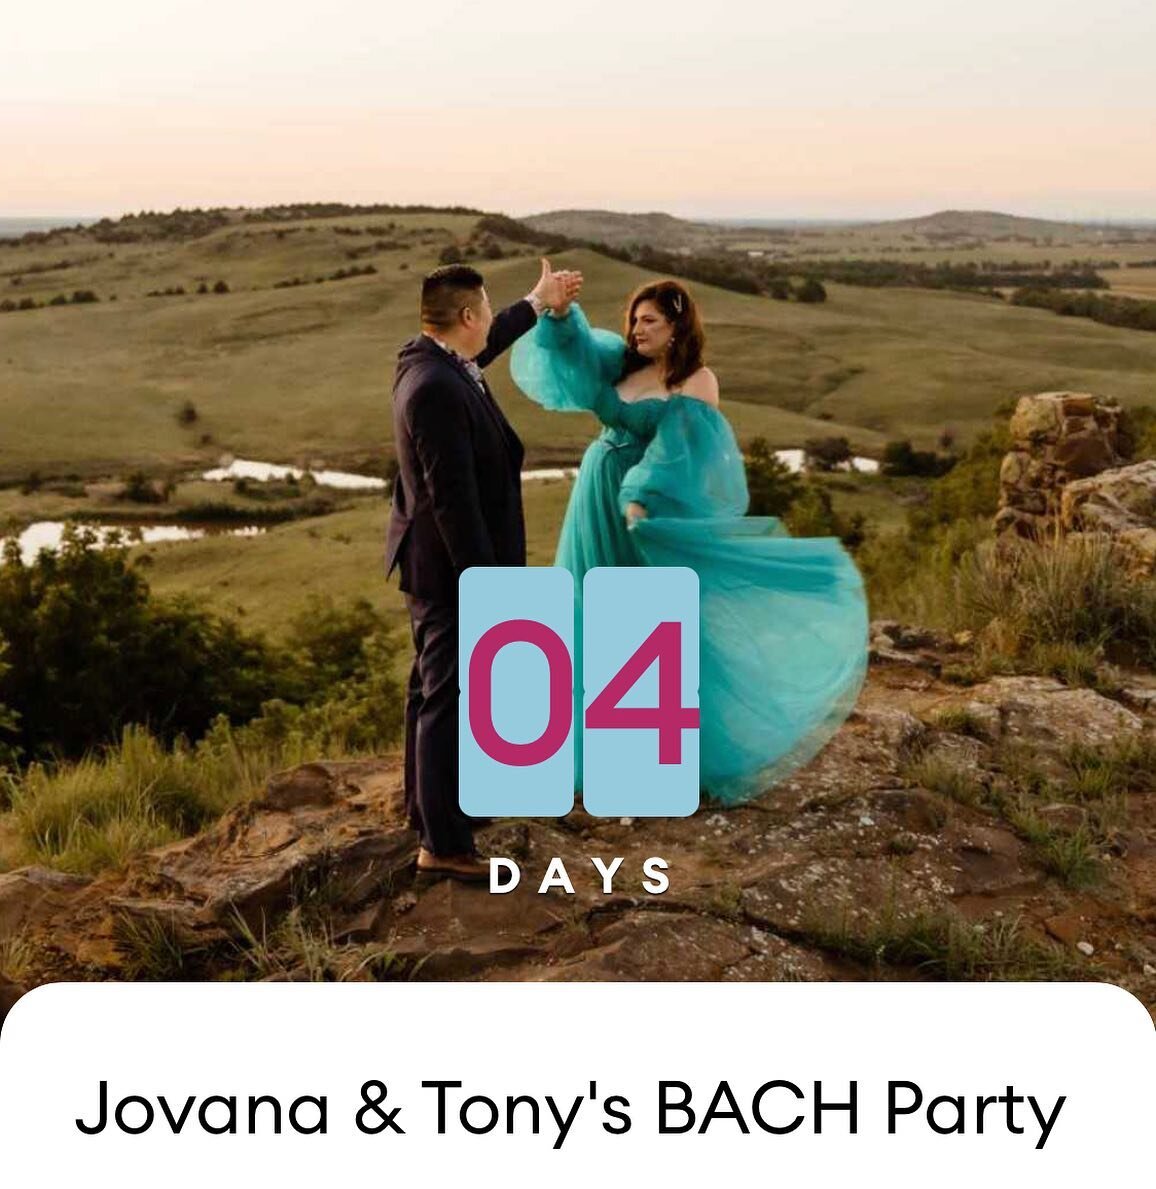 So excited to celebrate this weekend! Highly recommend @thebachparty app for all your Bach planning needs! 

#roadtrip #celebrate #bacheloretteparty #bachelor #shenanigans #dinner #bottleservice #club #barcrawl #surprise #ithadtobevu #luckyinlove